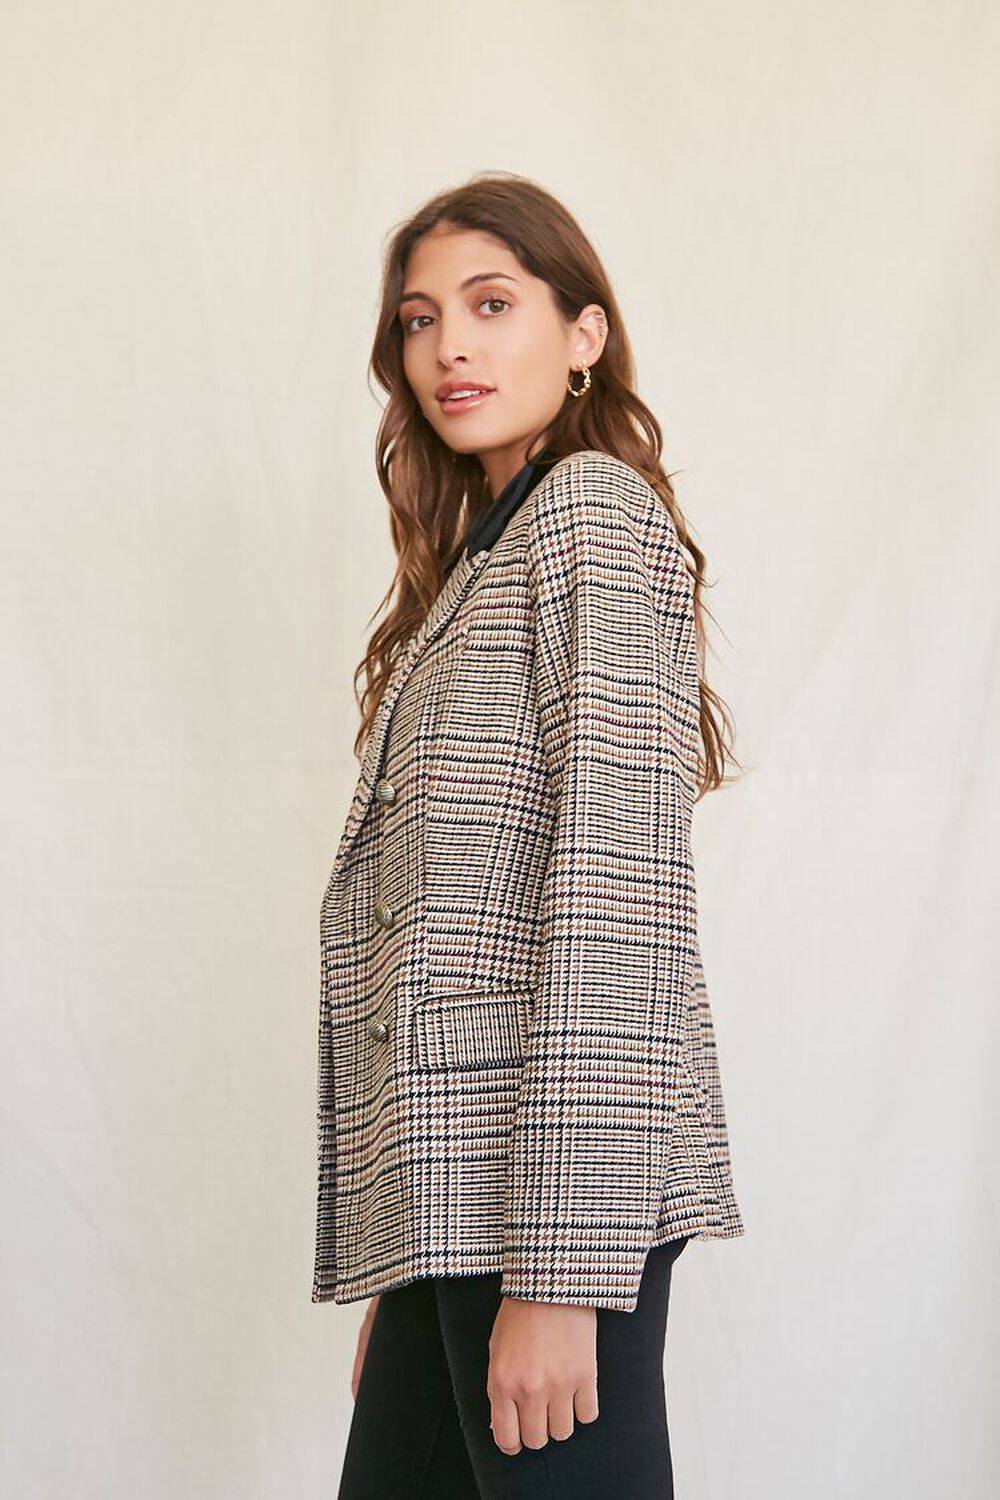 BROWN/MULTI Plaid Double-Breasted Blazer, image 2